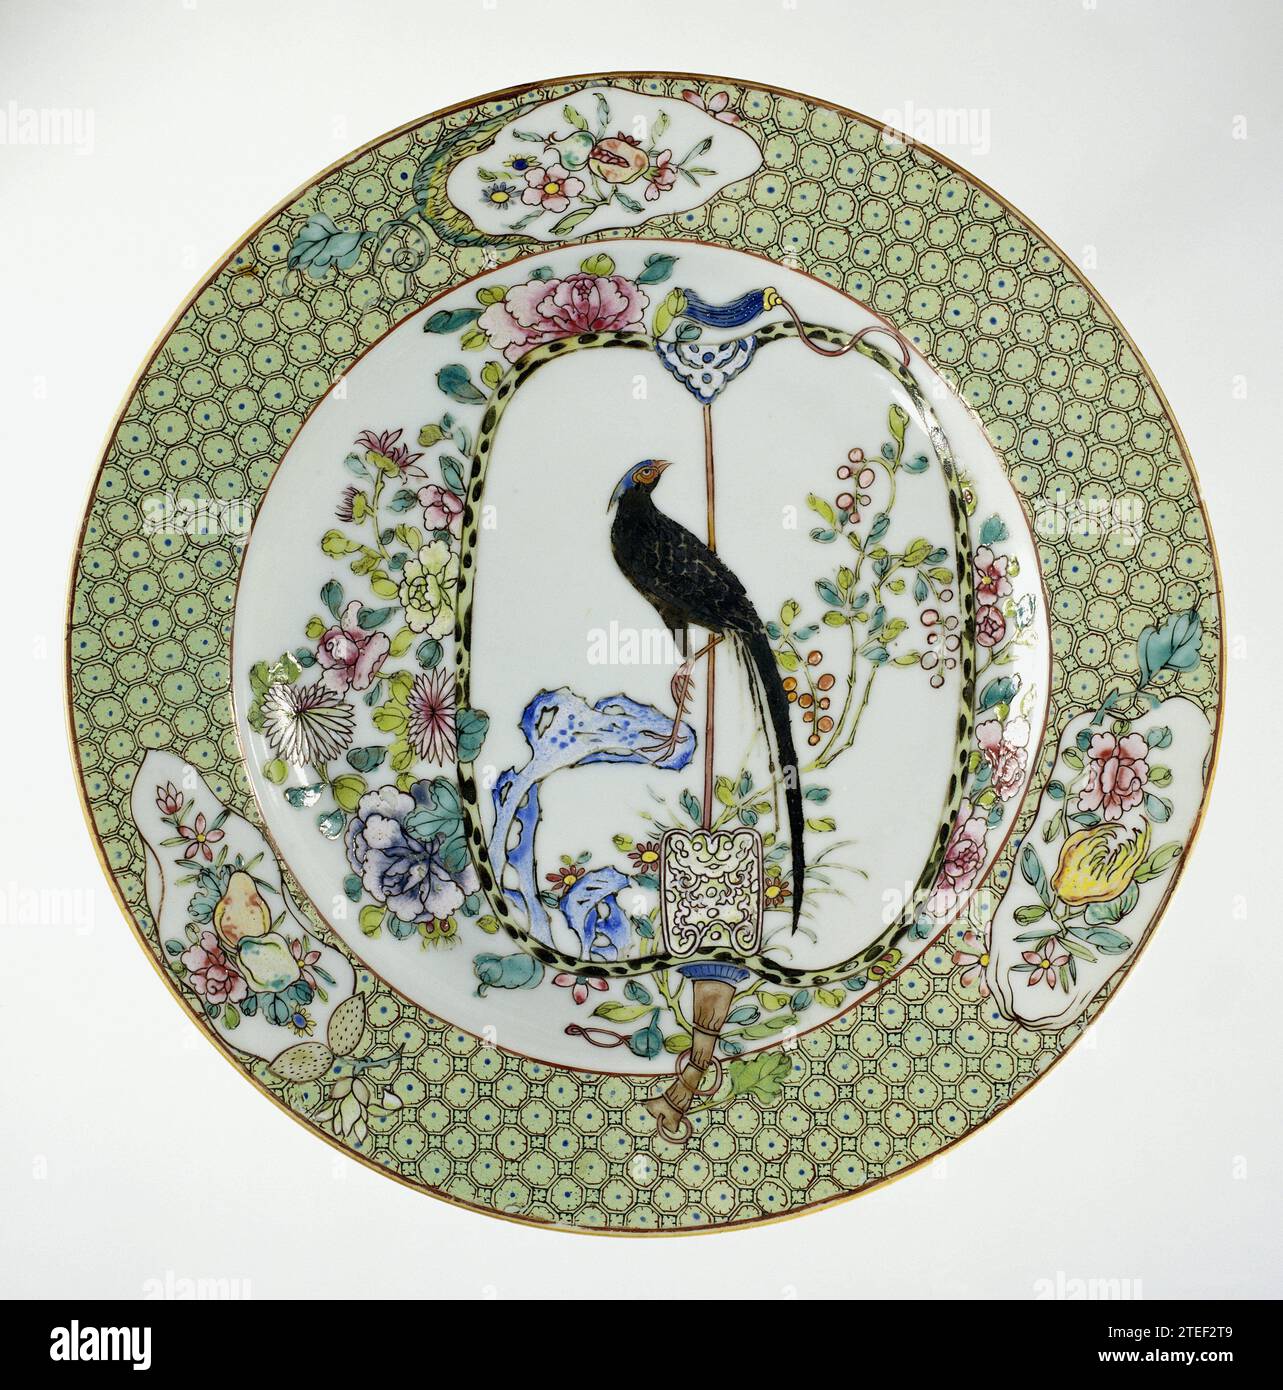 Plate with a fan decorated with a pheasant, anonymous, c. 1730 - c. 1745 Porcelain plate, painted on the glaze in blue, red, pink, green, yellow, black and silver. On the flat a fan whose handle runs on the wall and edge, on the fan a pheasant is depicted on a rock in flowering plants; For the fan peony and chrysanthemum branches; On the edge of servetwork interspersed with three cartouches in the form of fruits with fruit branches. Two cracks in the edge. Famle Rose. China porcelain. glaze. gold (metal) painting / gilding / vitrification Porcelain plate, painted on the glaze in blue, red, pin Stock Photo